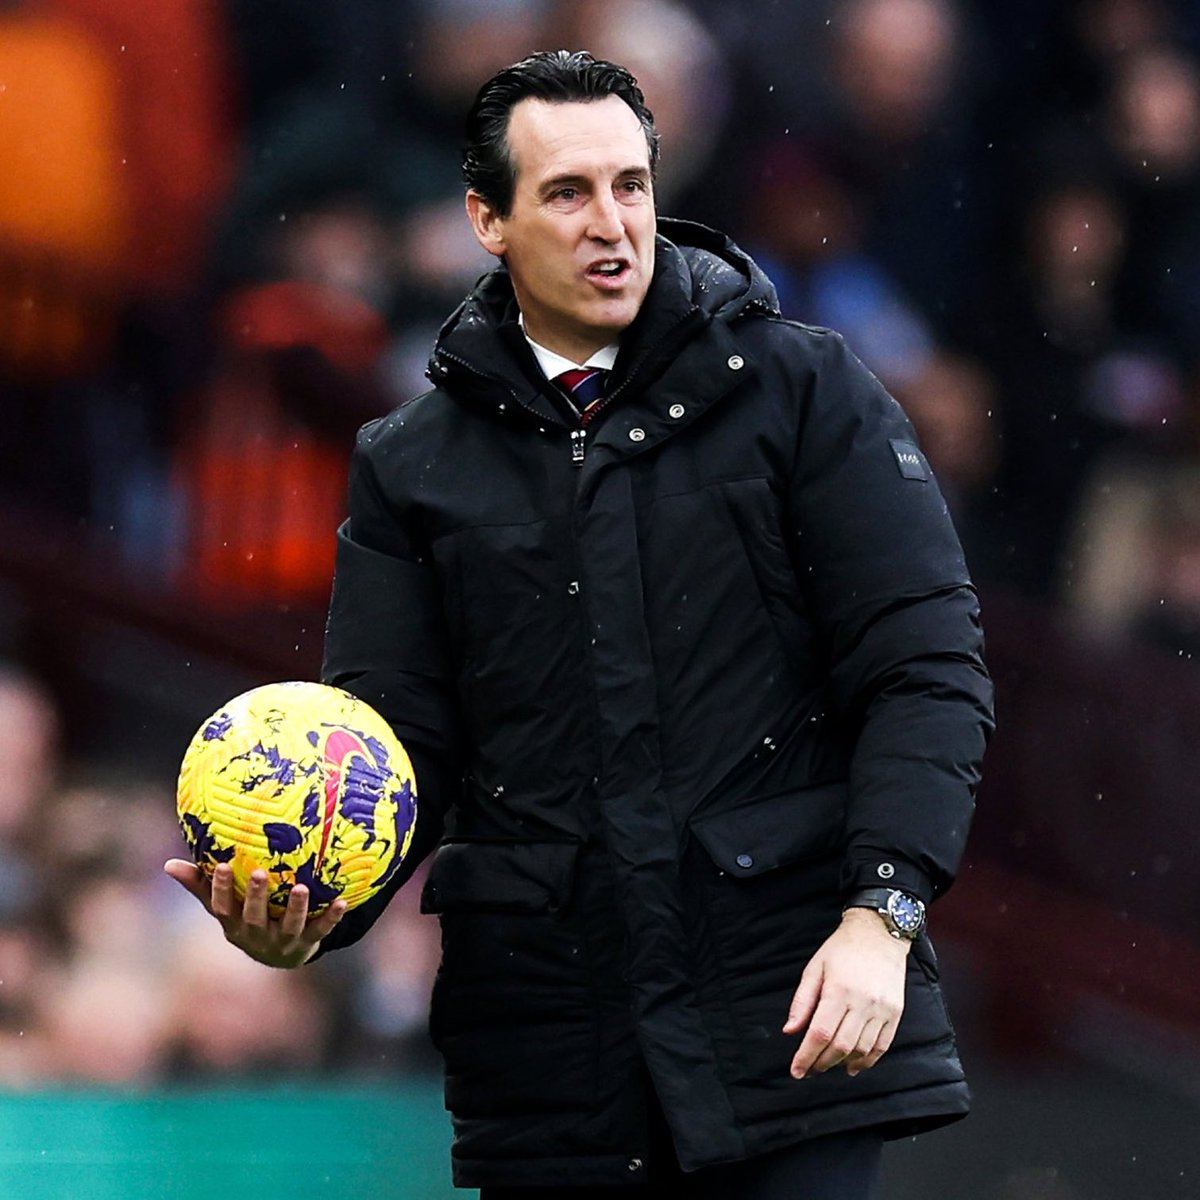 It has just clocked that UNAI EMERY is the reason Arsenal lost the title. Beautiful story! Beautiful Story!! #TOTMCI